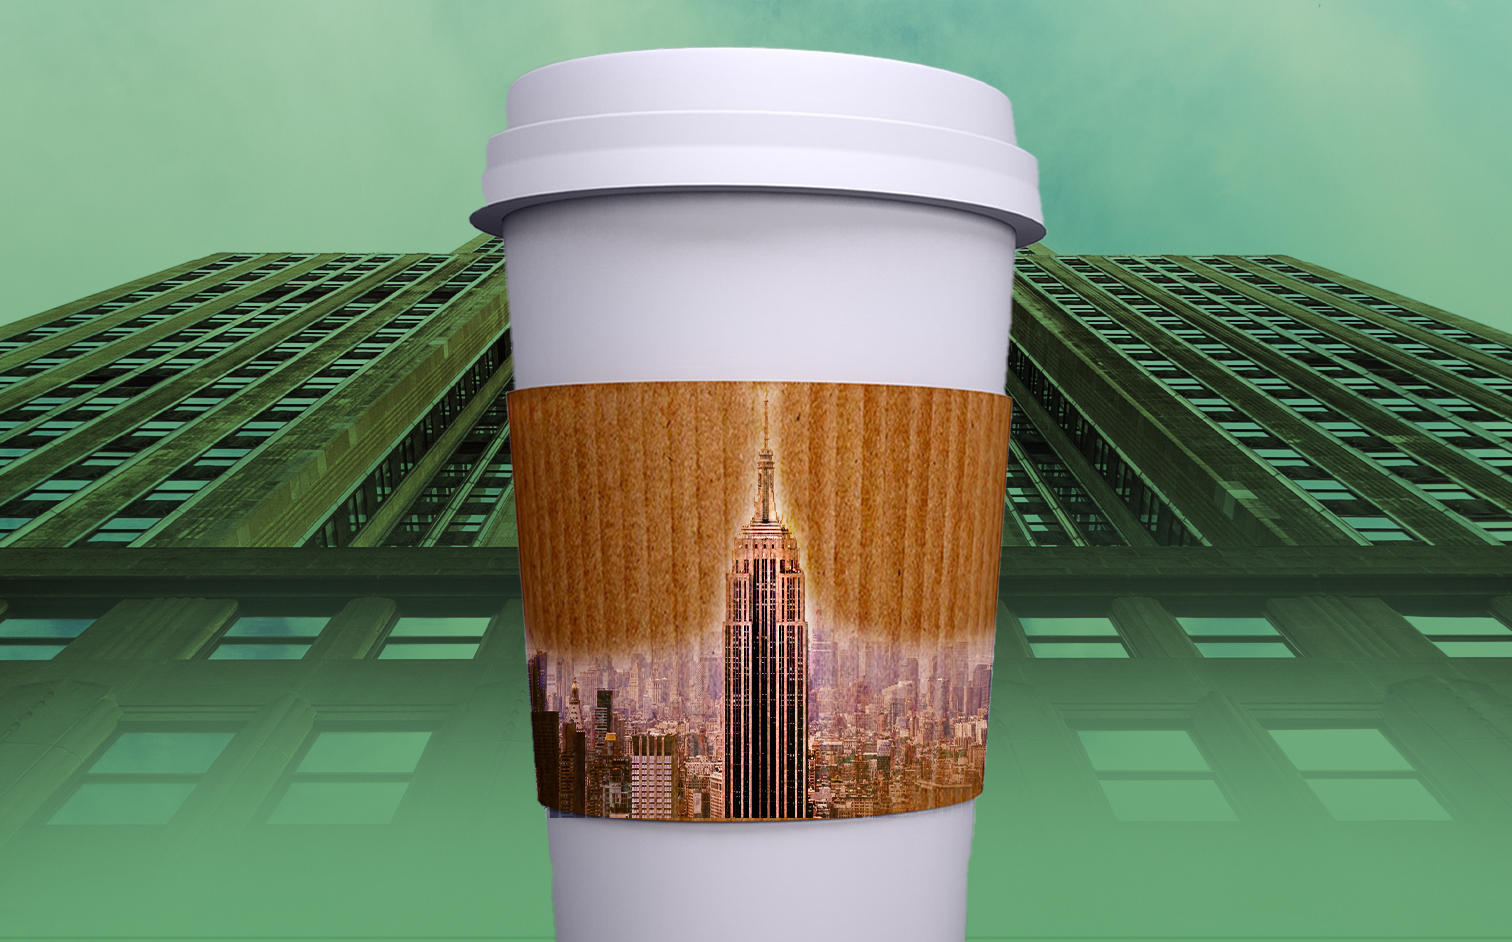 Starbucks is bringing a high-concept store to a giant triplex at the base of the Empire State Building (Illustration by The Real Deal)